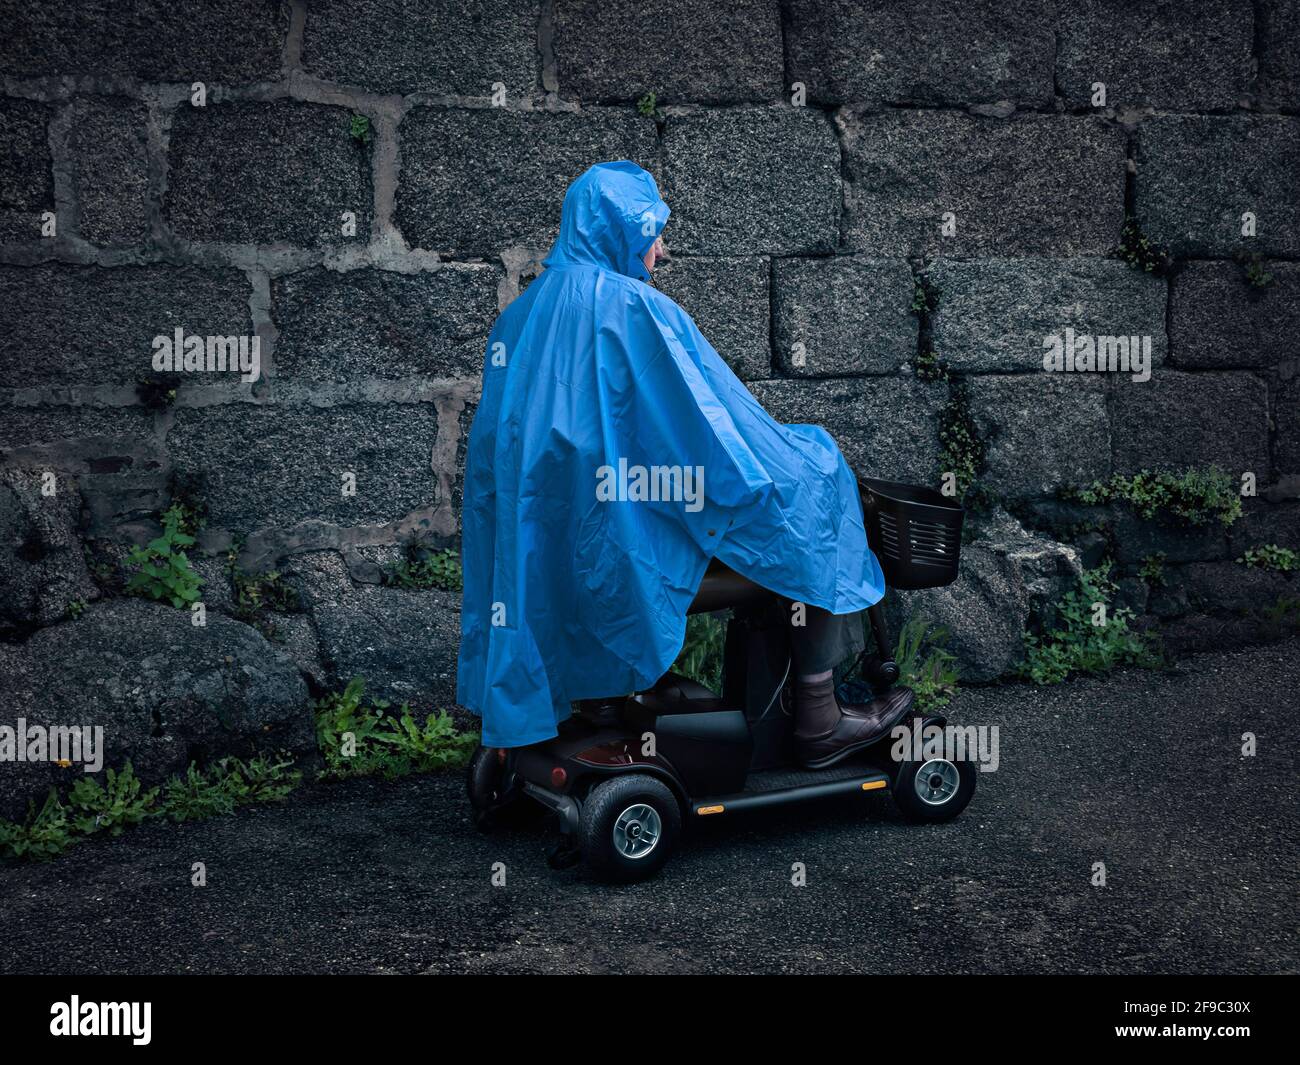 Man on a Mobility Scooter / Vehicle wearing a Blue Raincoat / Poncho / Cagoule / Jacket, in profile with Old Grey Stone Wall Background Stock Photo